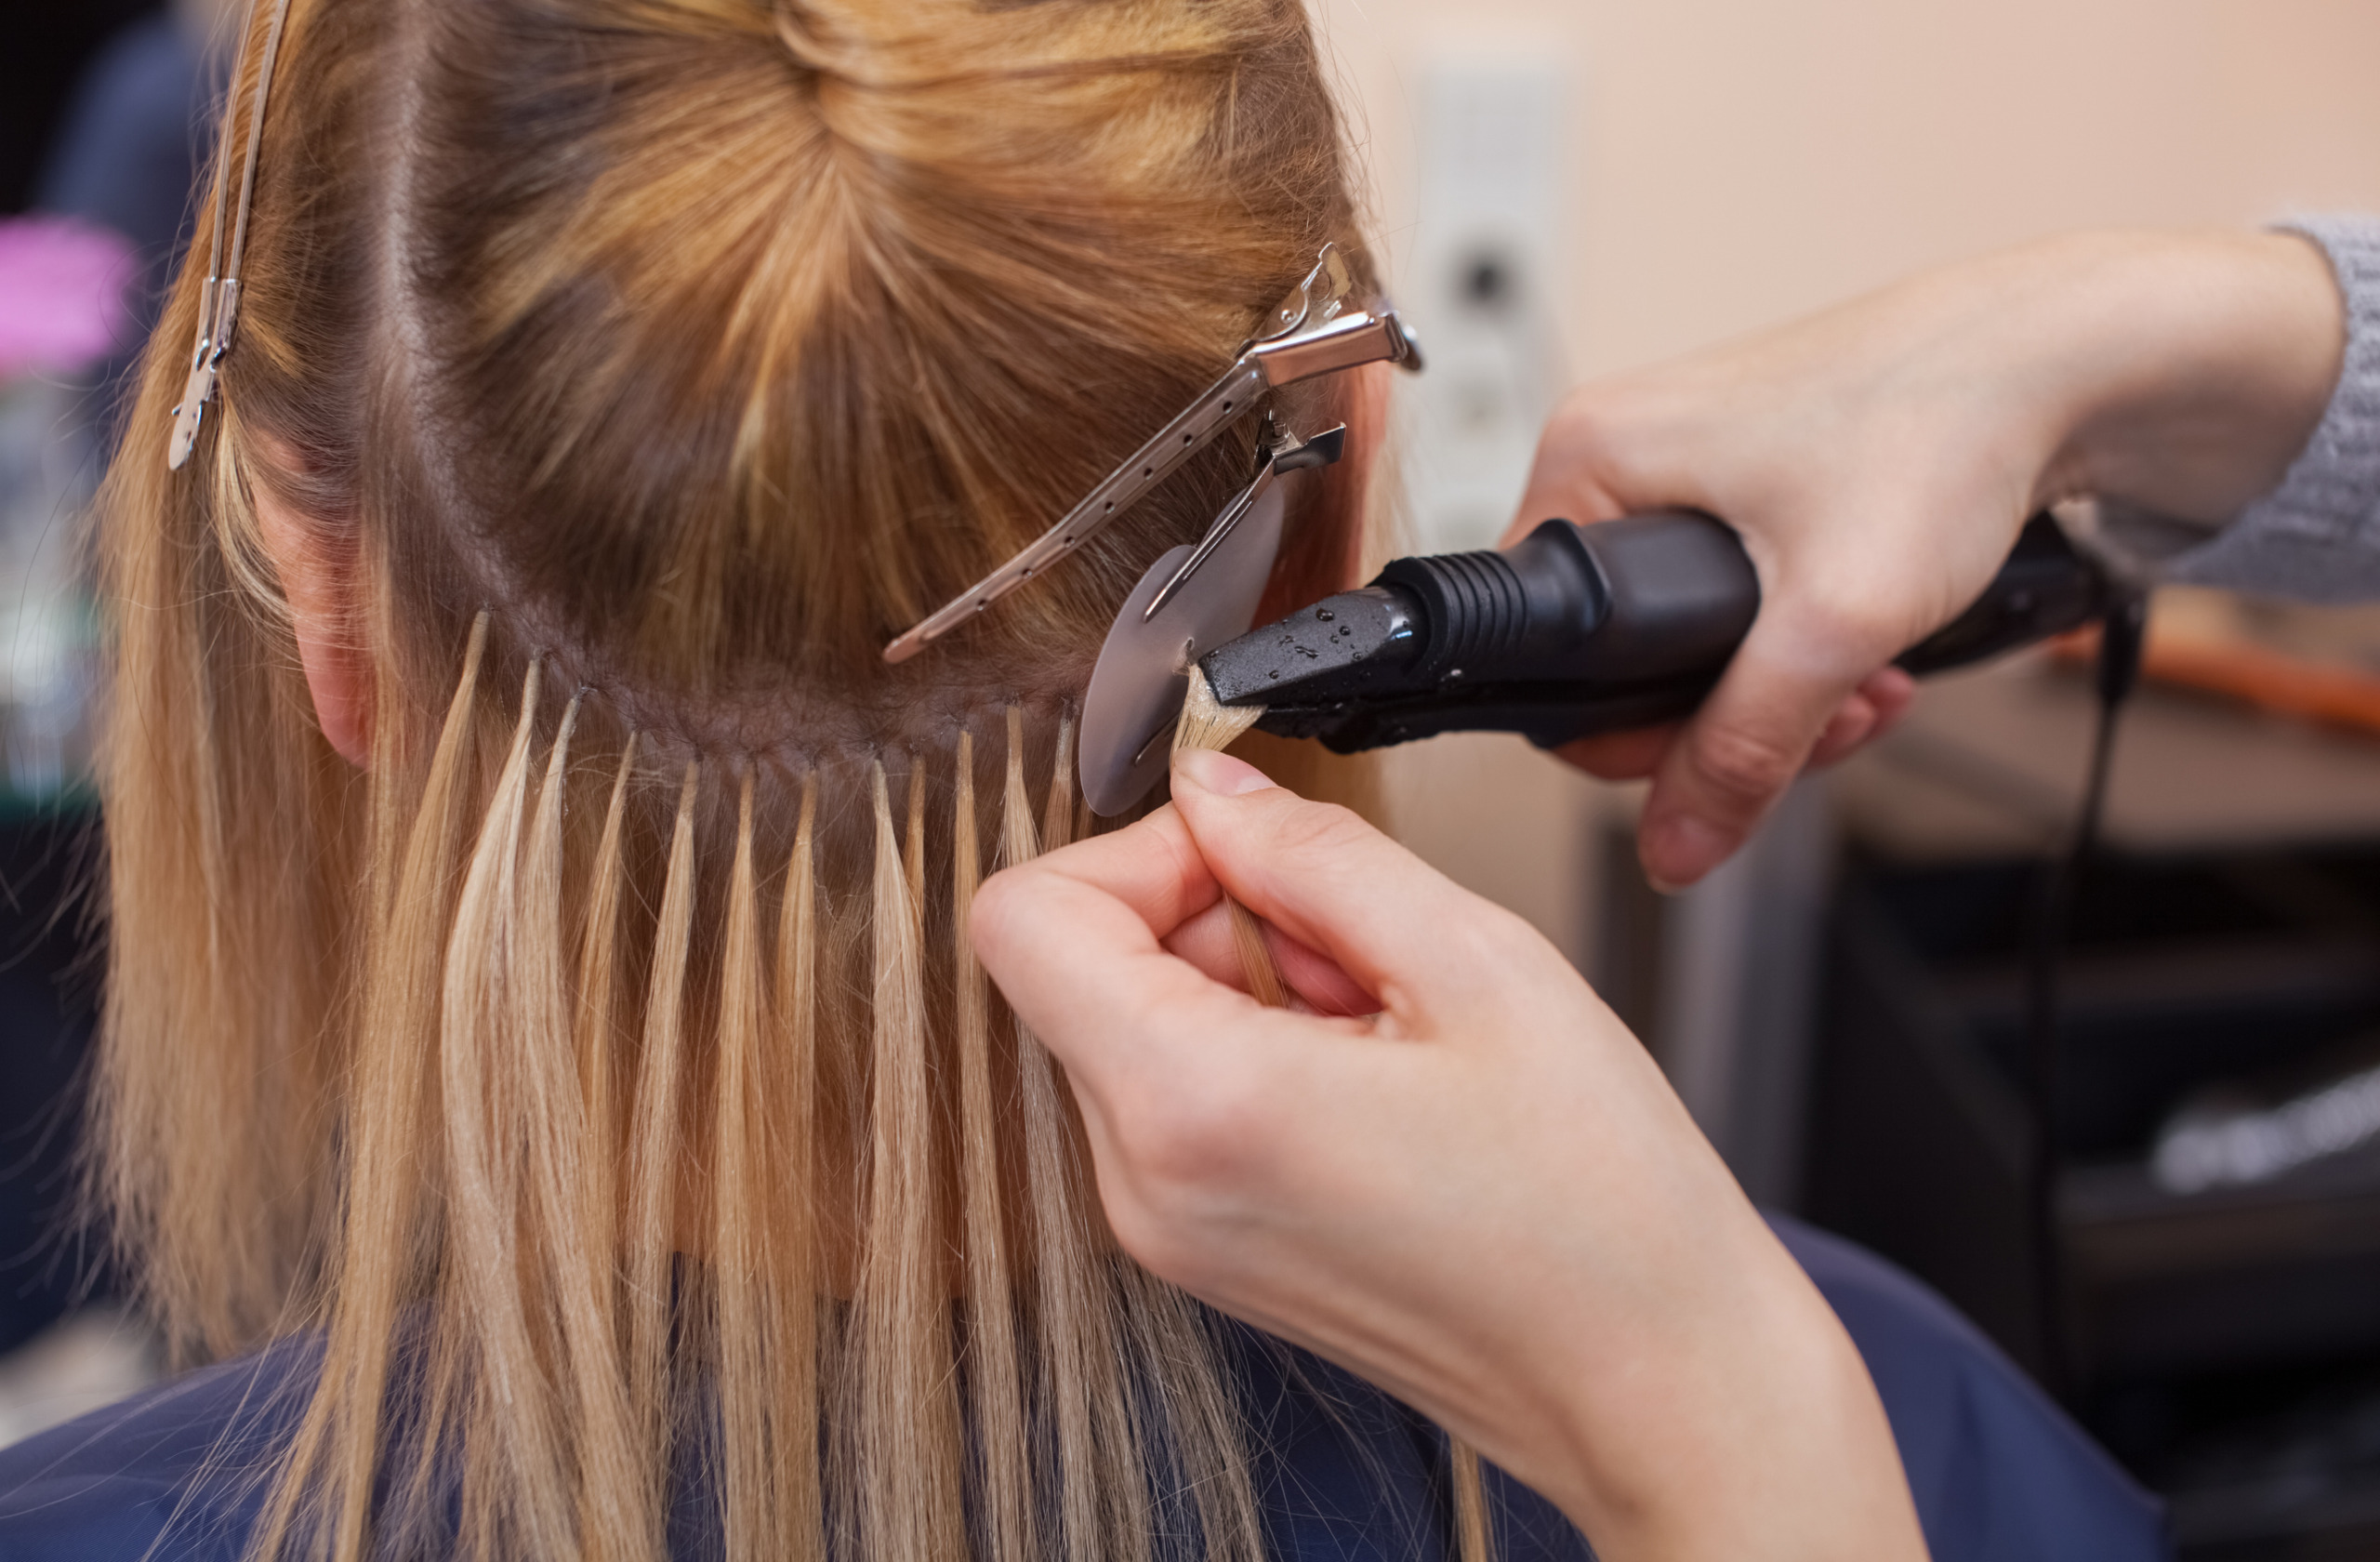 permanent hair extensions being applied by a professional